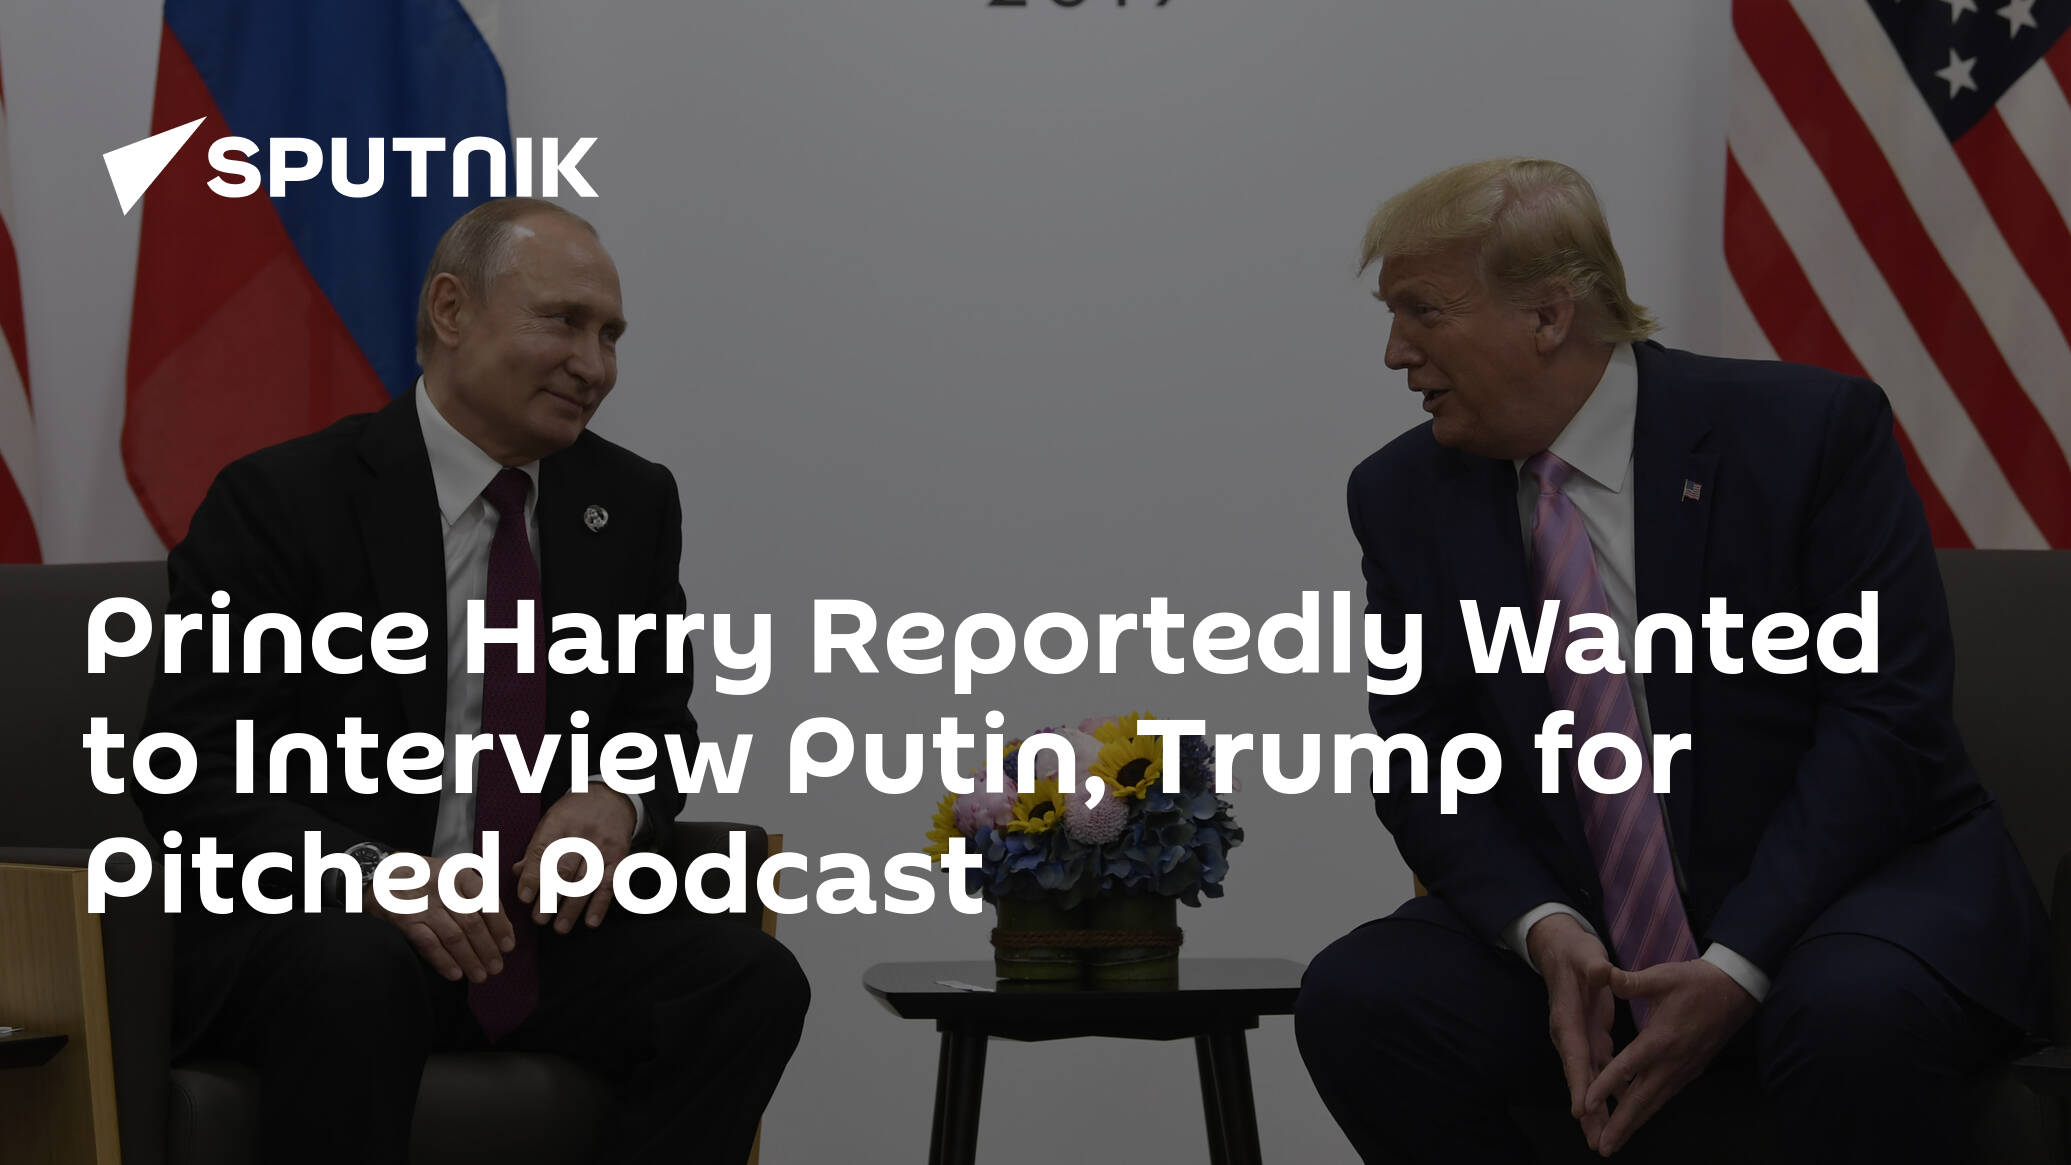 Prince Harry Reportedly Wanted to Interview Putin, Trump for Pitched Podcast